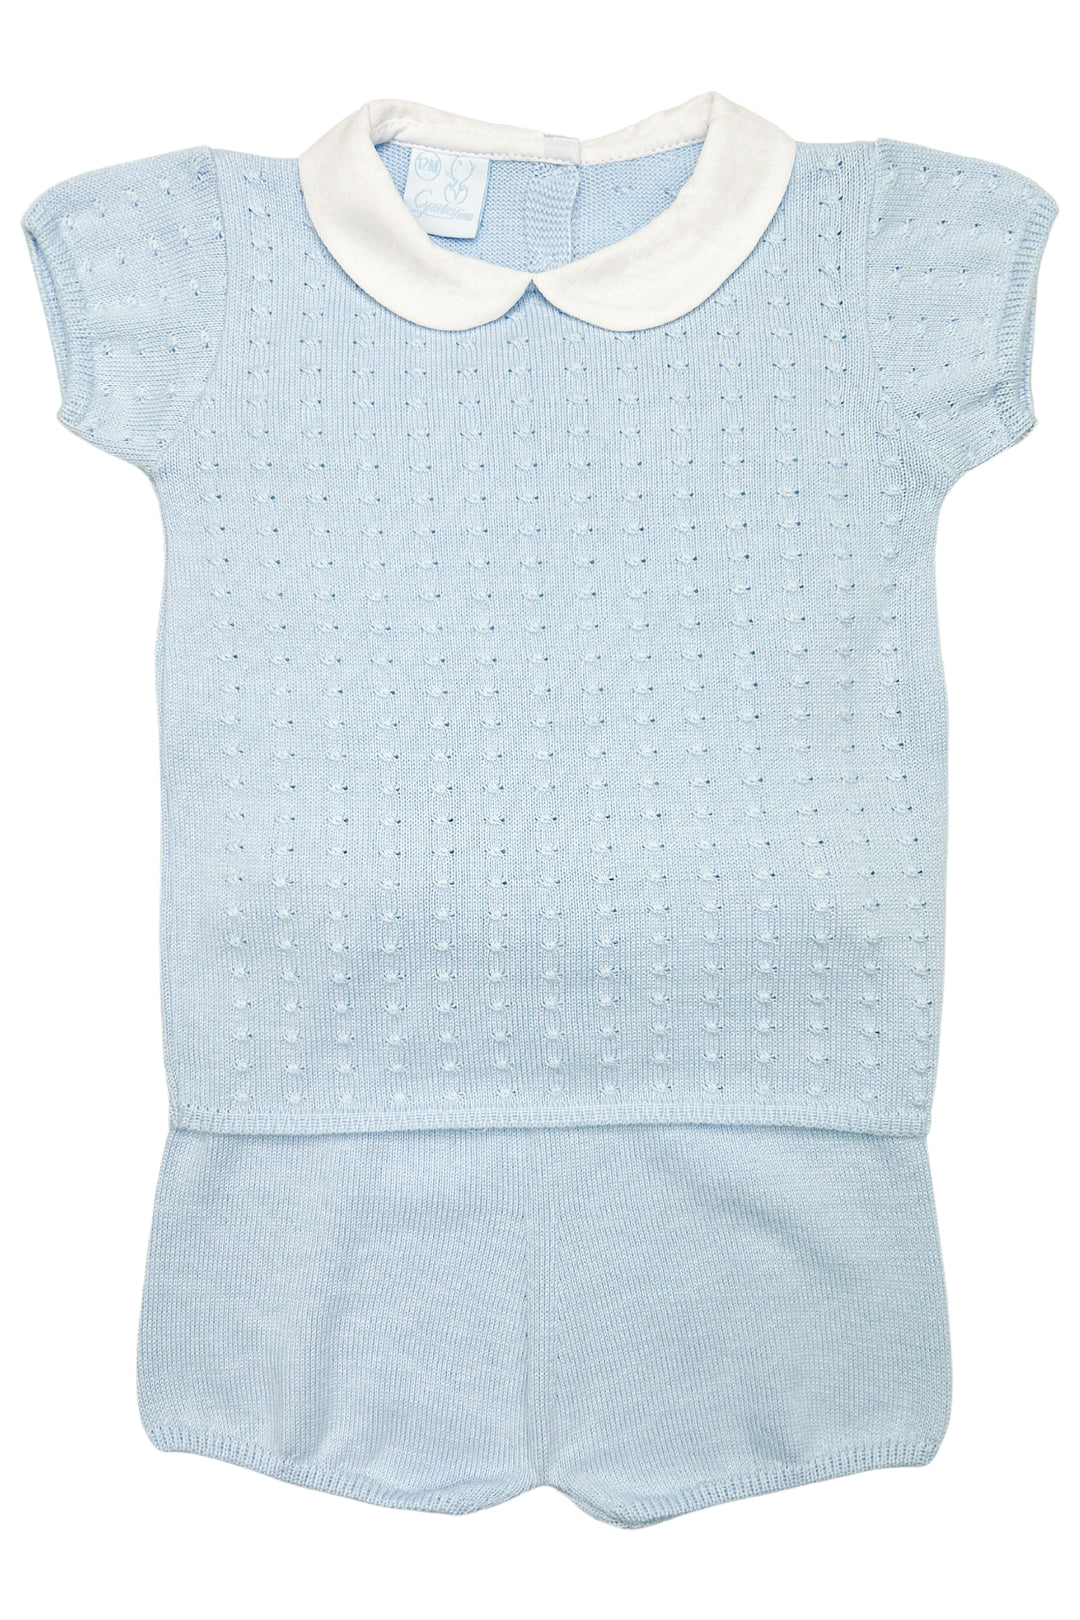 Granlei "Harry" Baby Blue Knit Top & Shorts | Millie and John